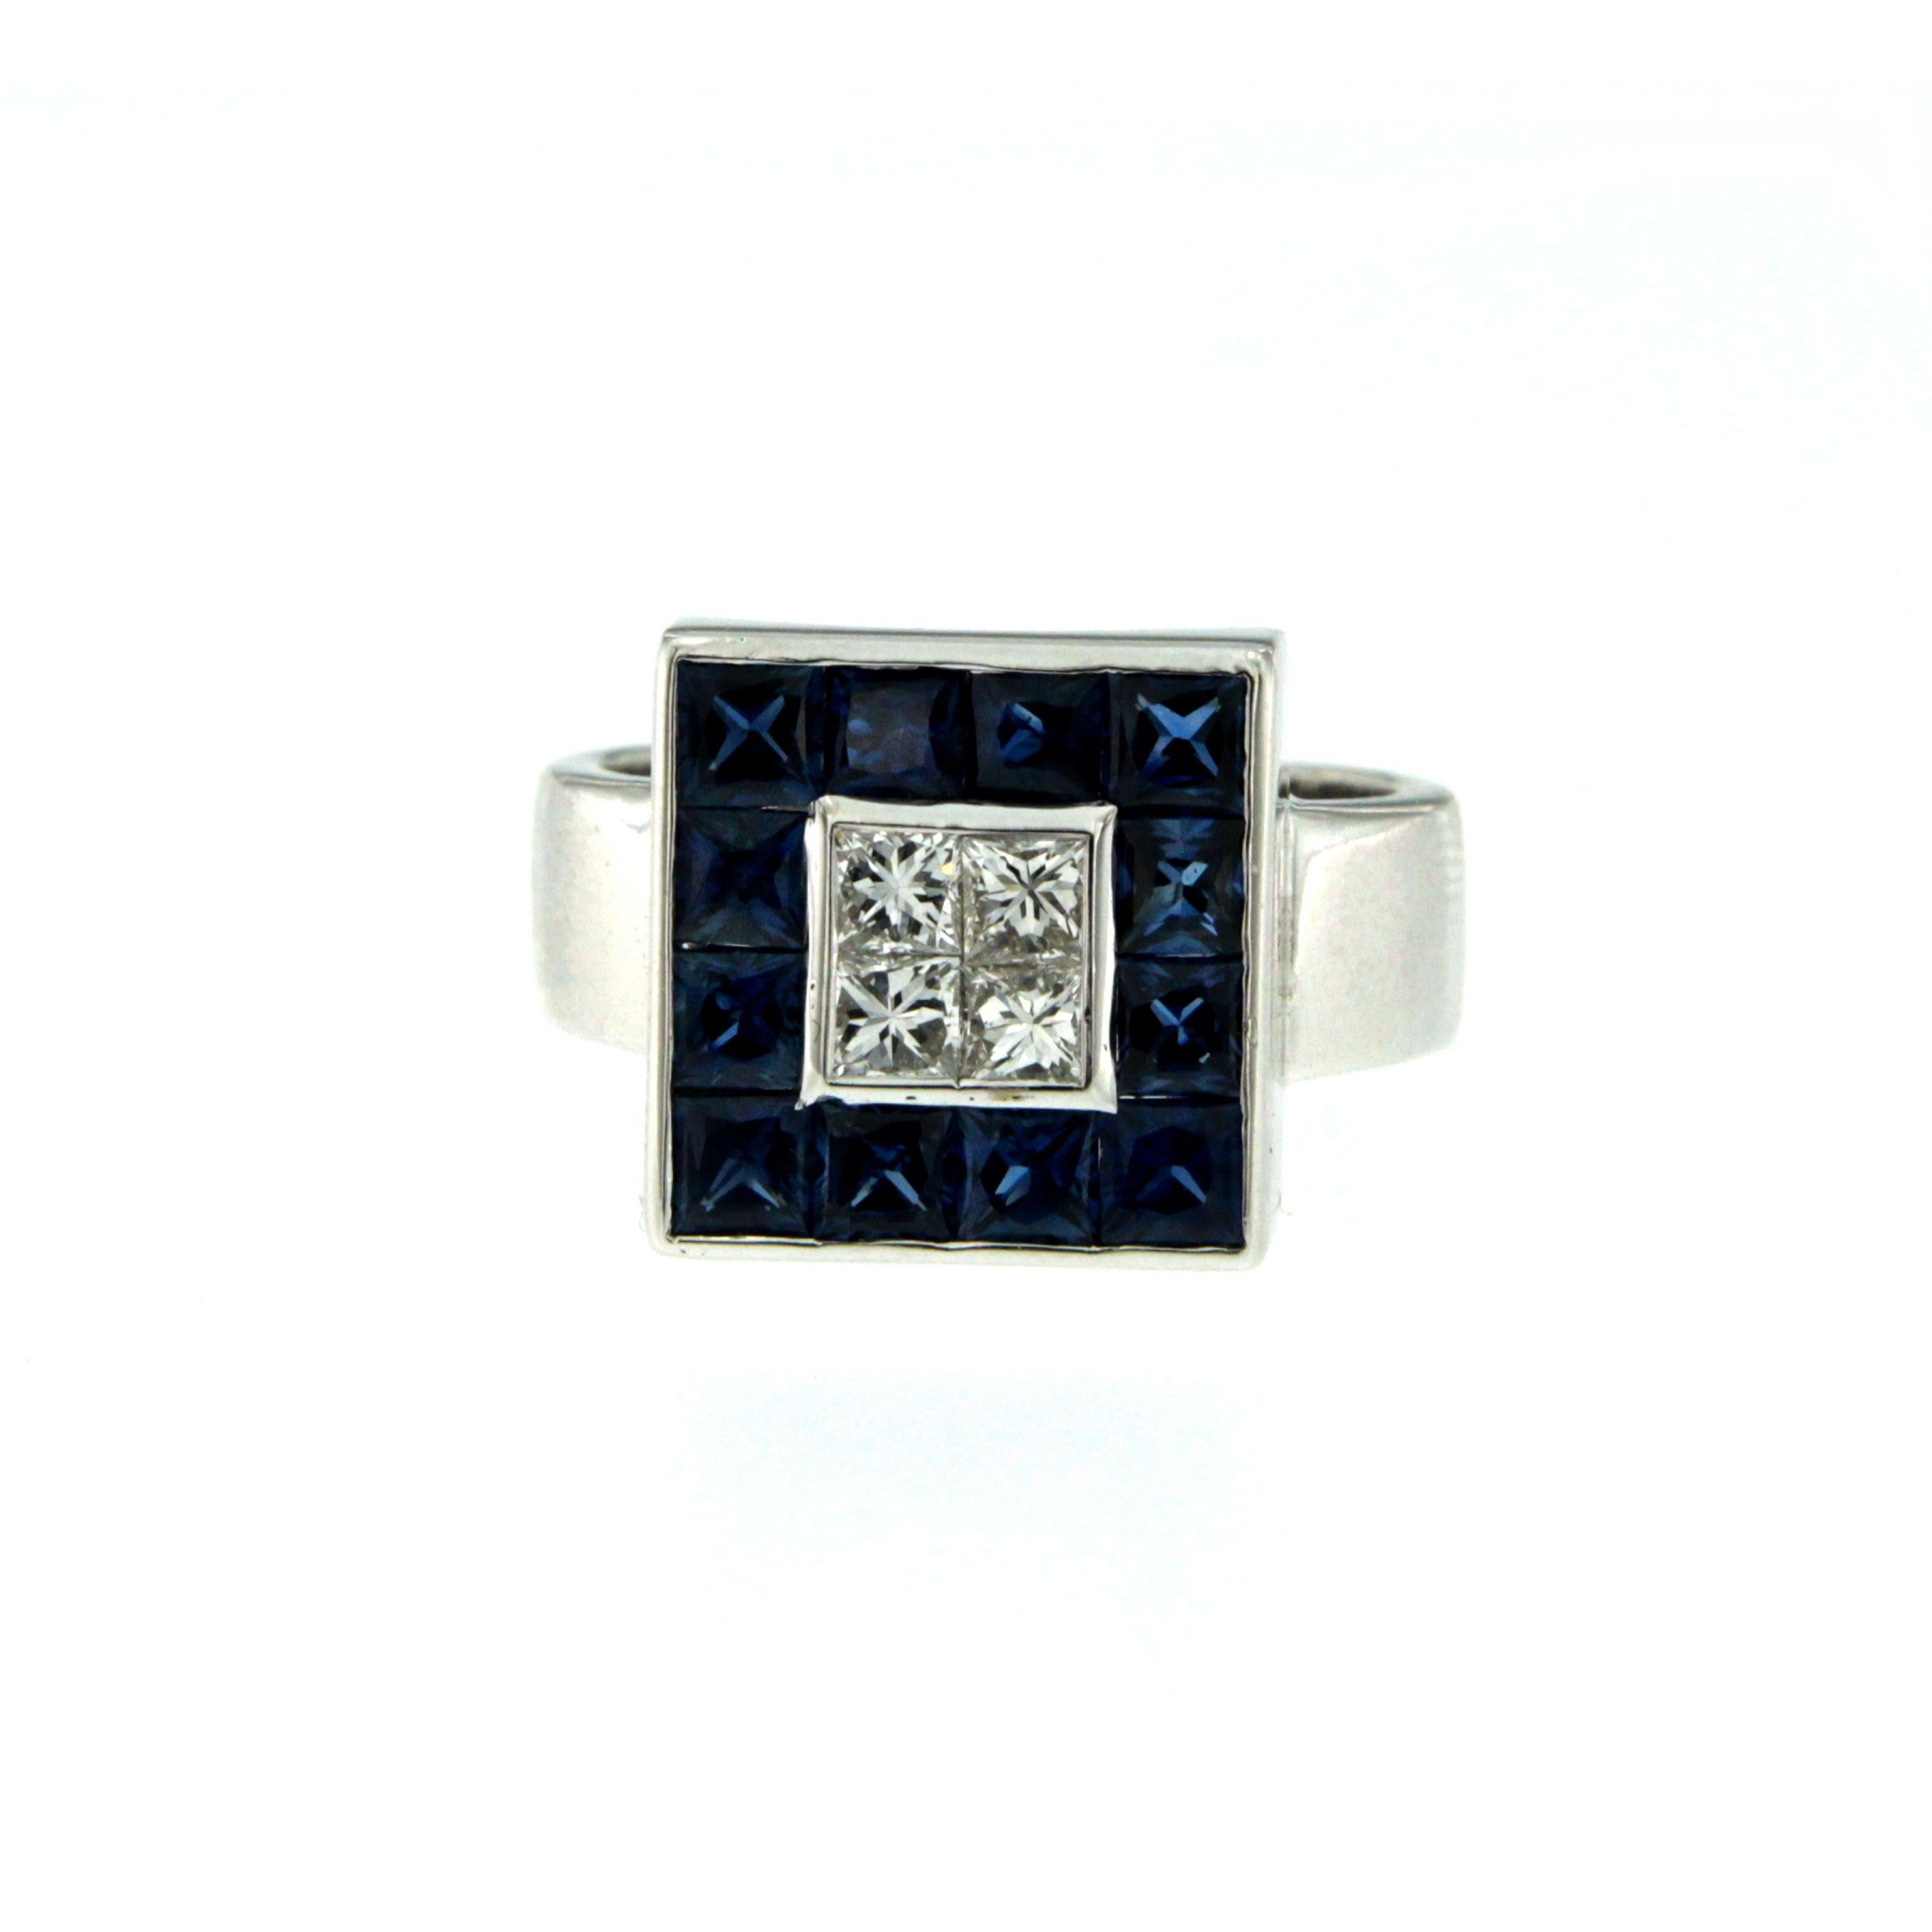 An elegant and unusual square design ring, hand made in 18k White Gold and set with 4 large Princess Cut Diamonds in the center, weighs 1 carat total and graded F/G color Vvs clarity, surrounded by 2.50 carats of Natural Blue Burma square cut